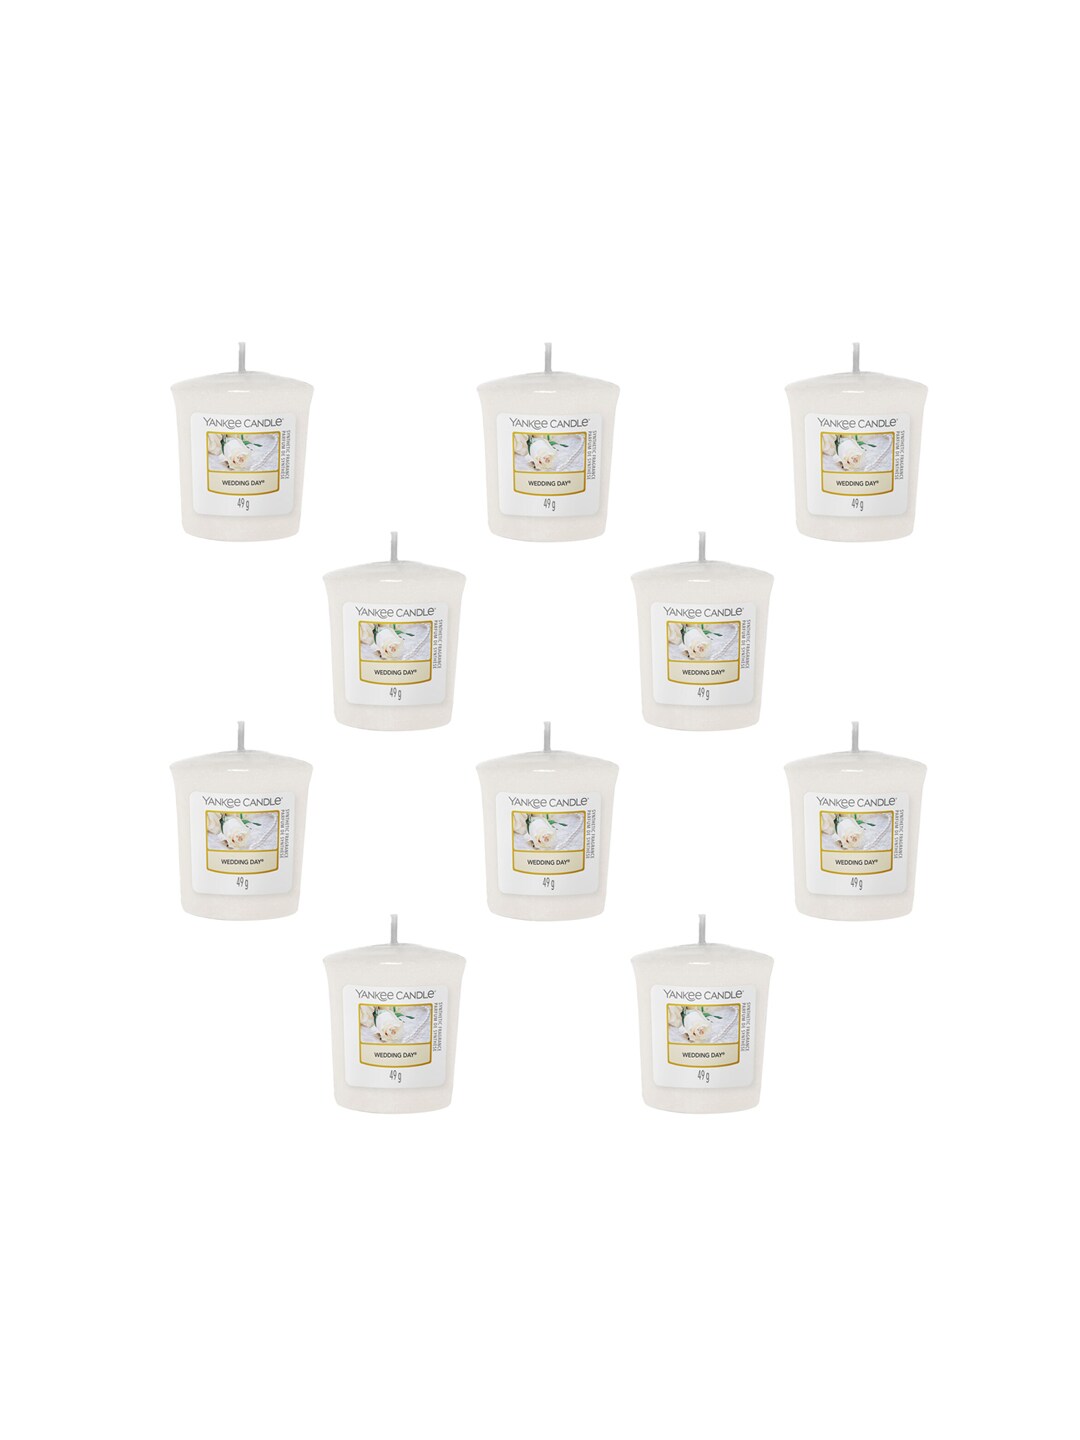 YANKEE CANDLE Set Of 10 White Classic Votive Wedding Day Scented Candles Price in India